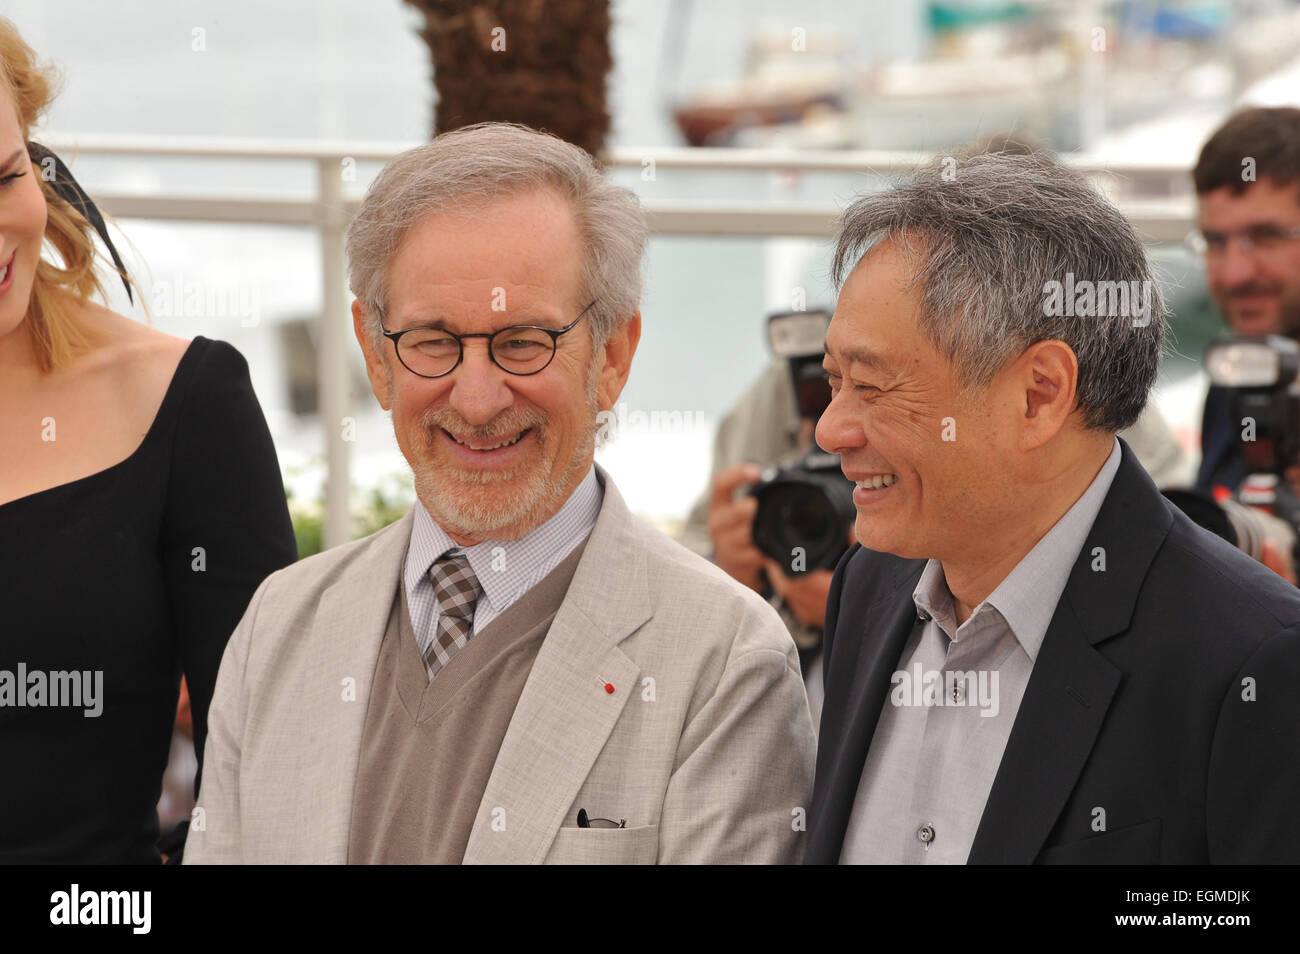 CANNES, FRANCE - MAY 15, 2013: Steven Spielberg & Ang Lee (right) at the photocall for the Jury of the 66th Festival de Cannes. Stock Photo